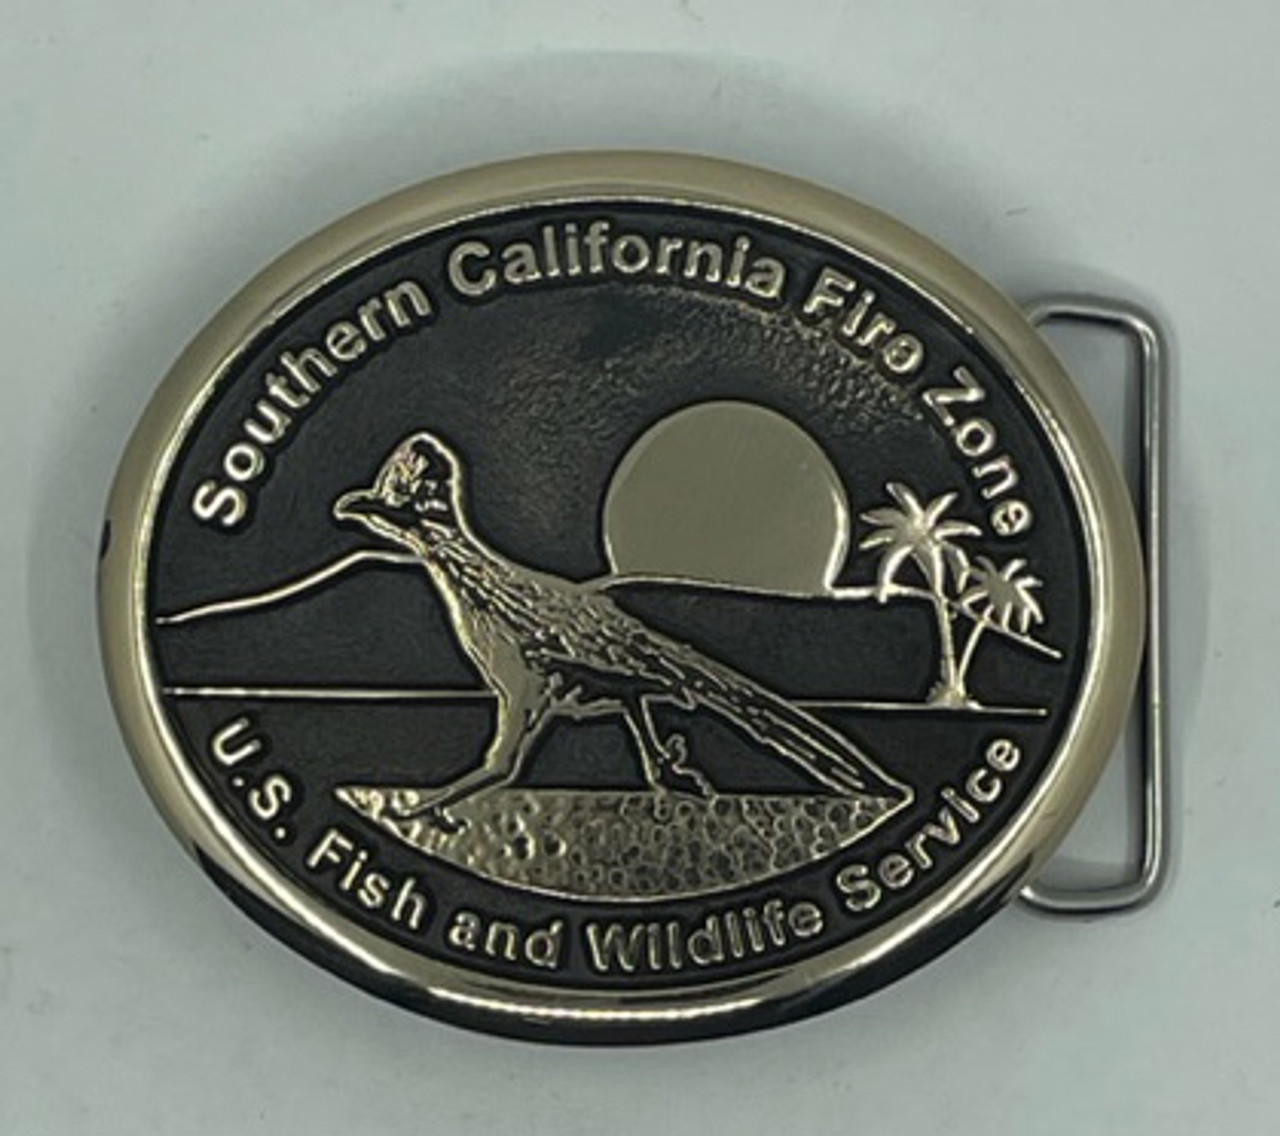 Southern California Fire Zone USFWS Buckle (RESTRICTED)